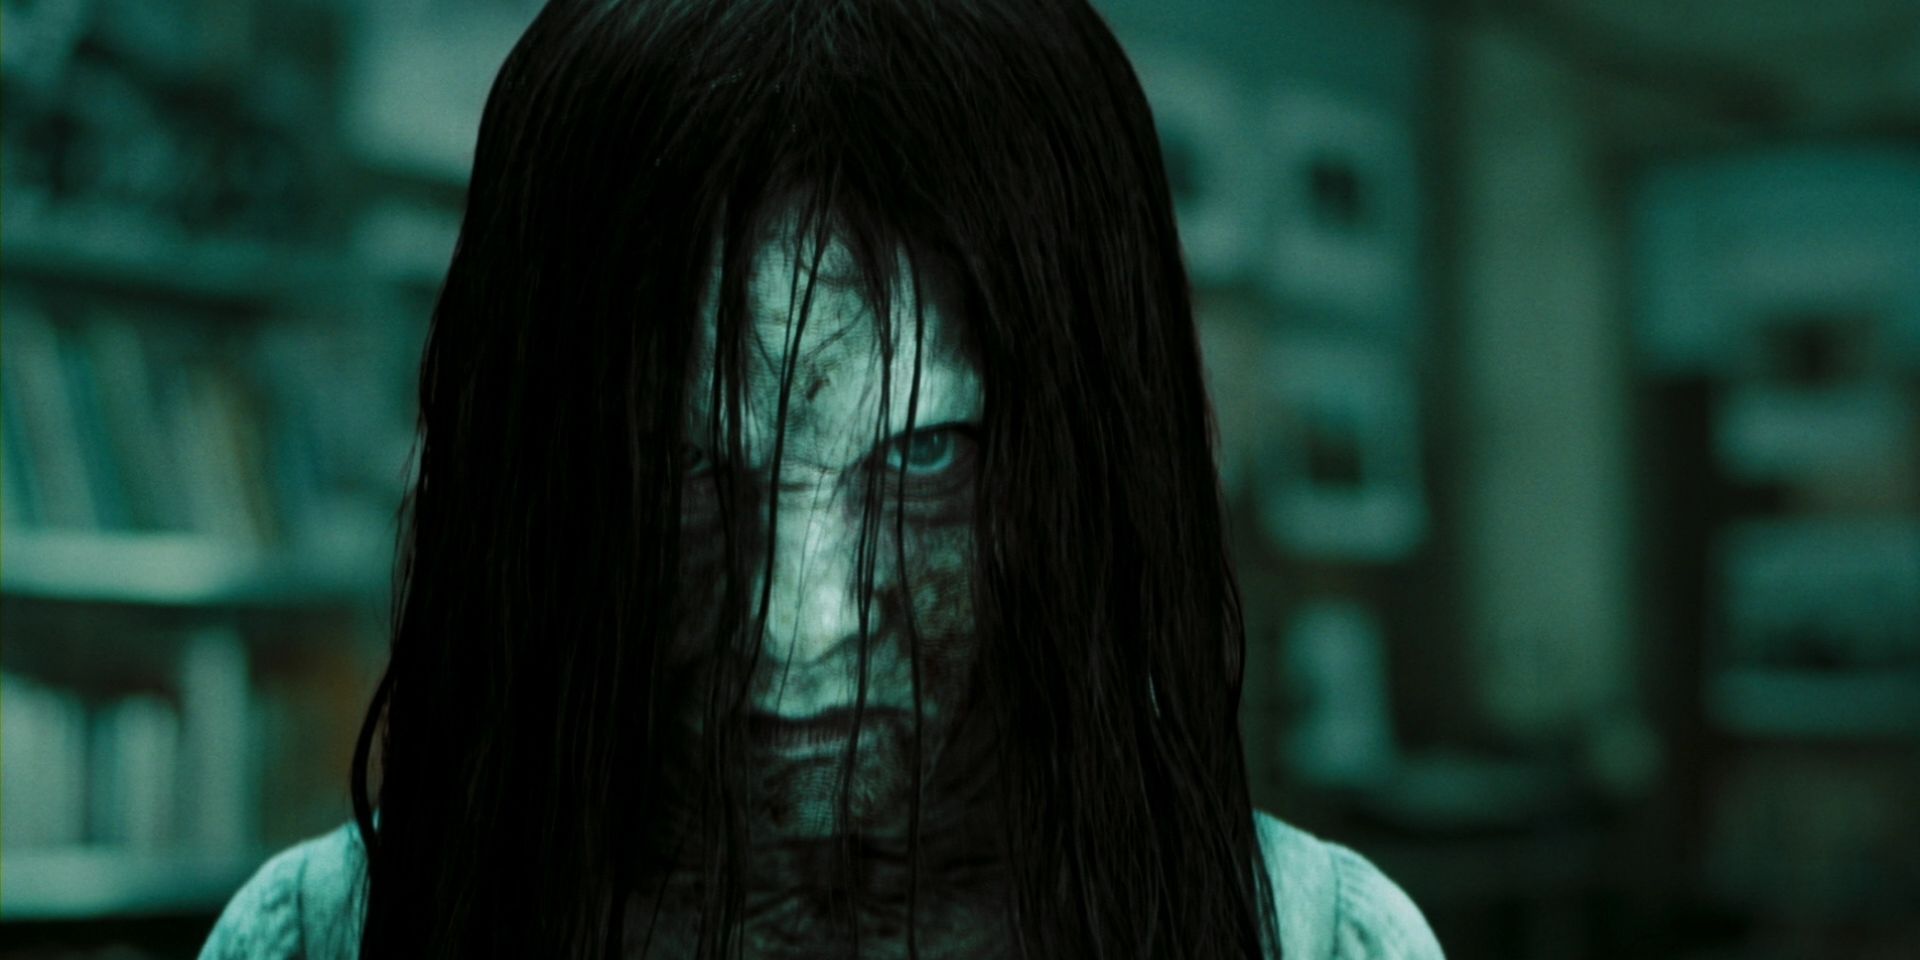 A girl from the well Samara in 2002 The Ring